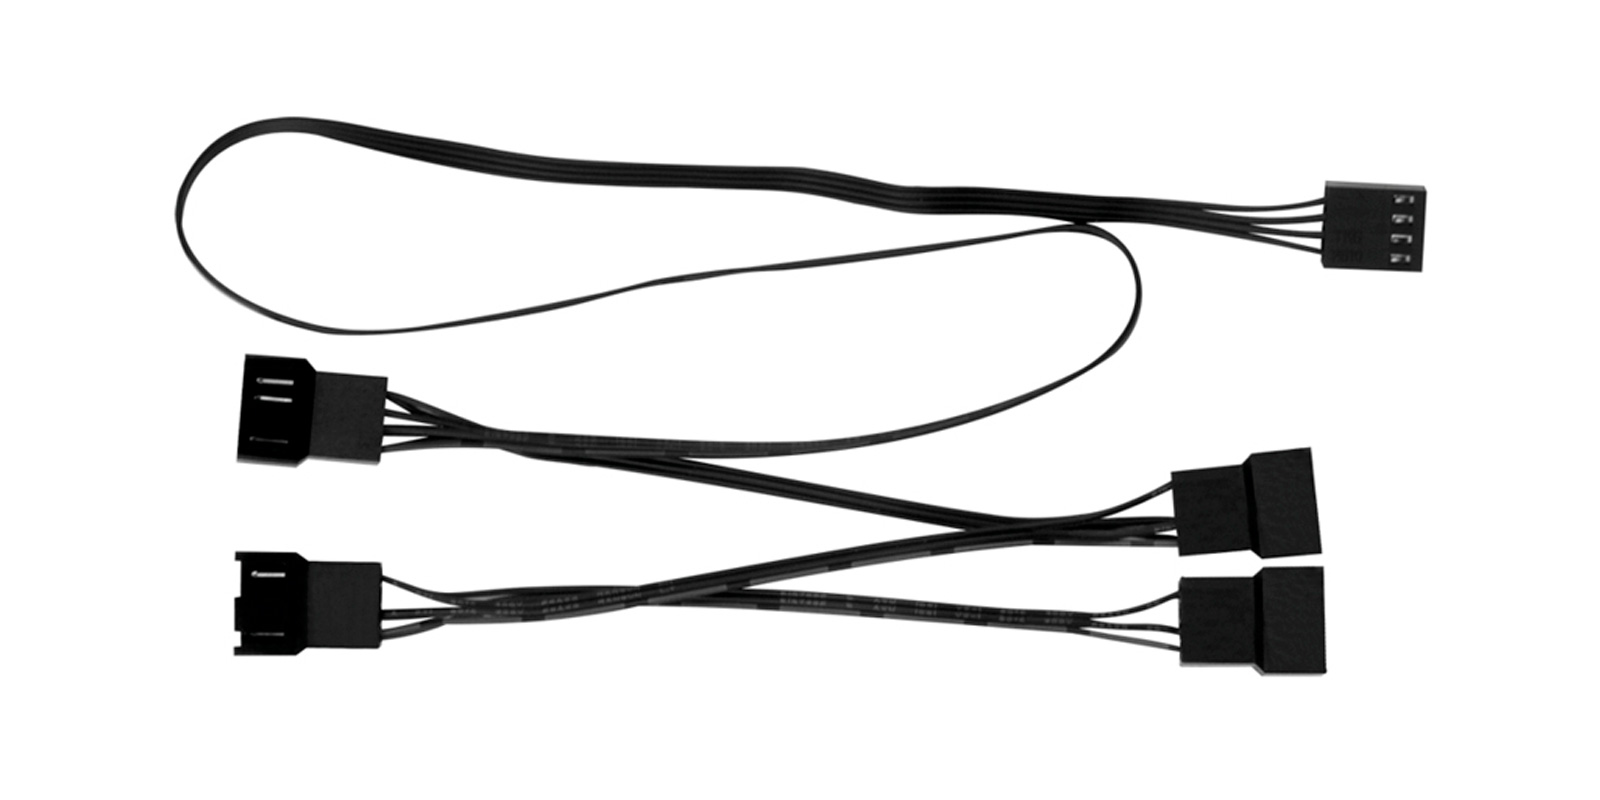 pst-cable-rev2-F01.jpg